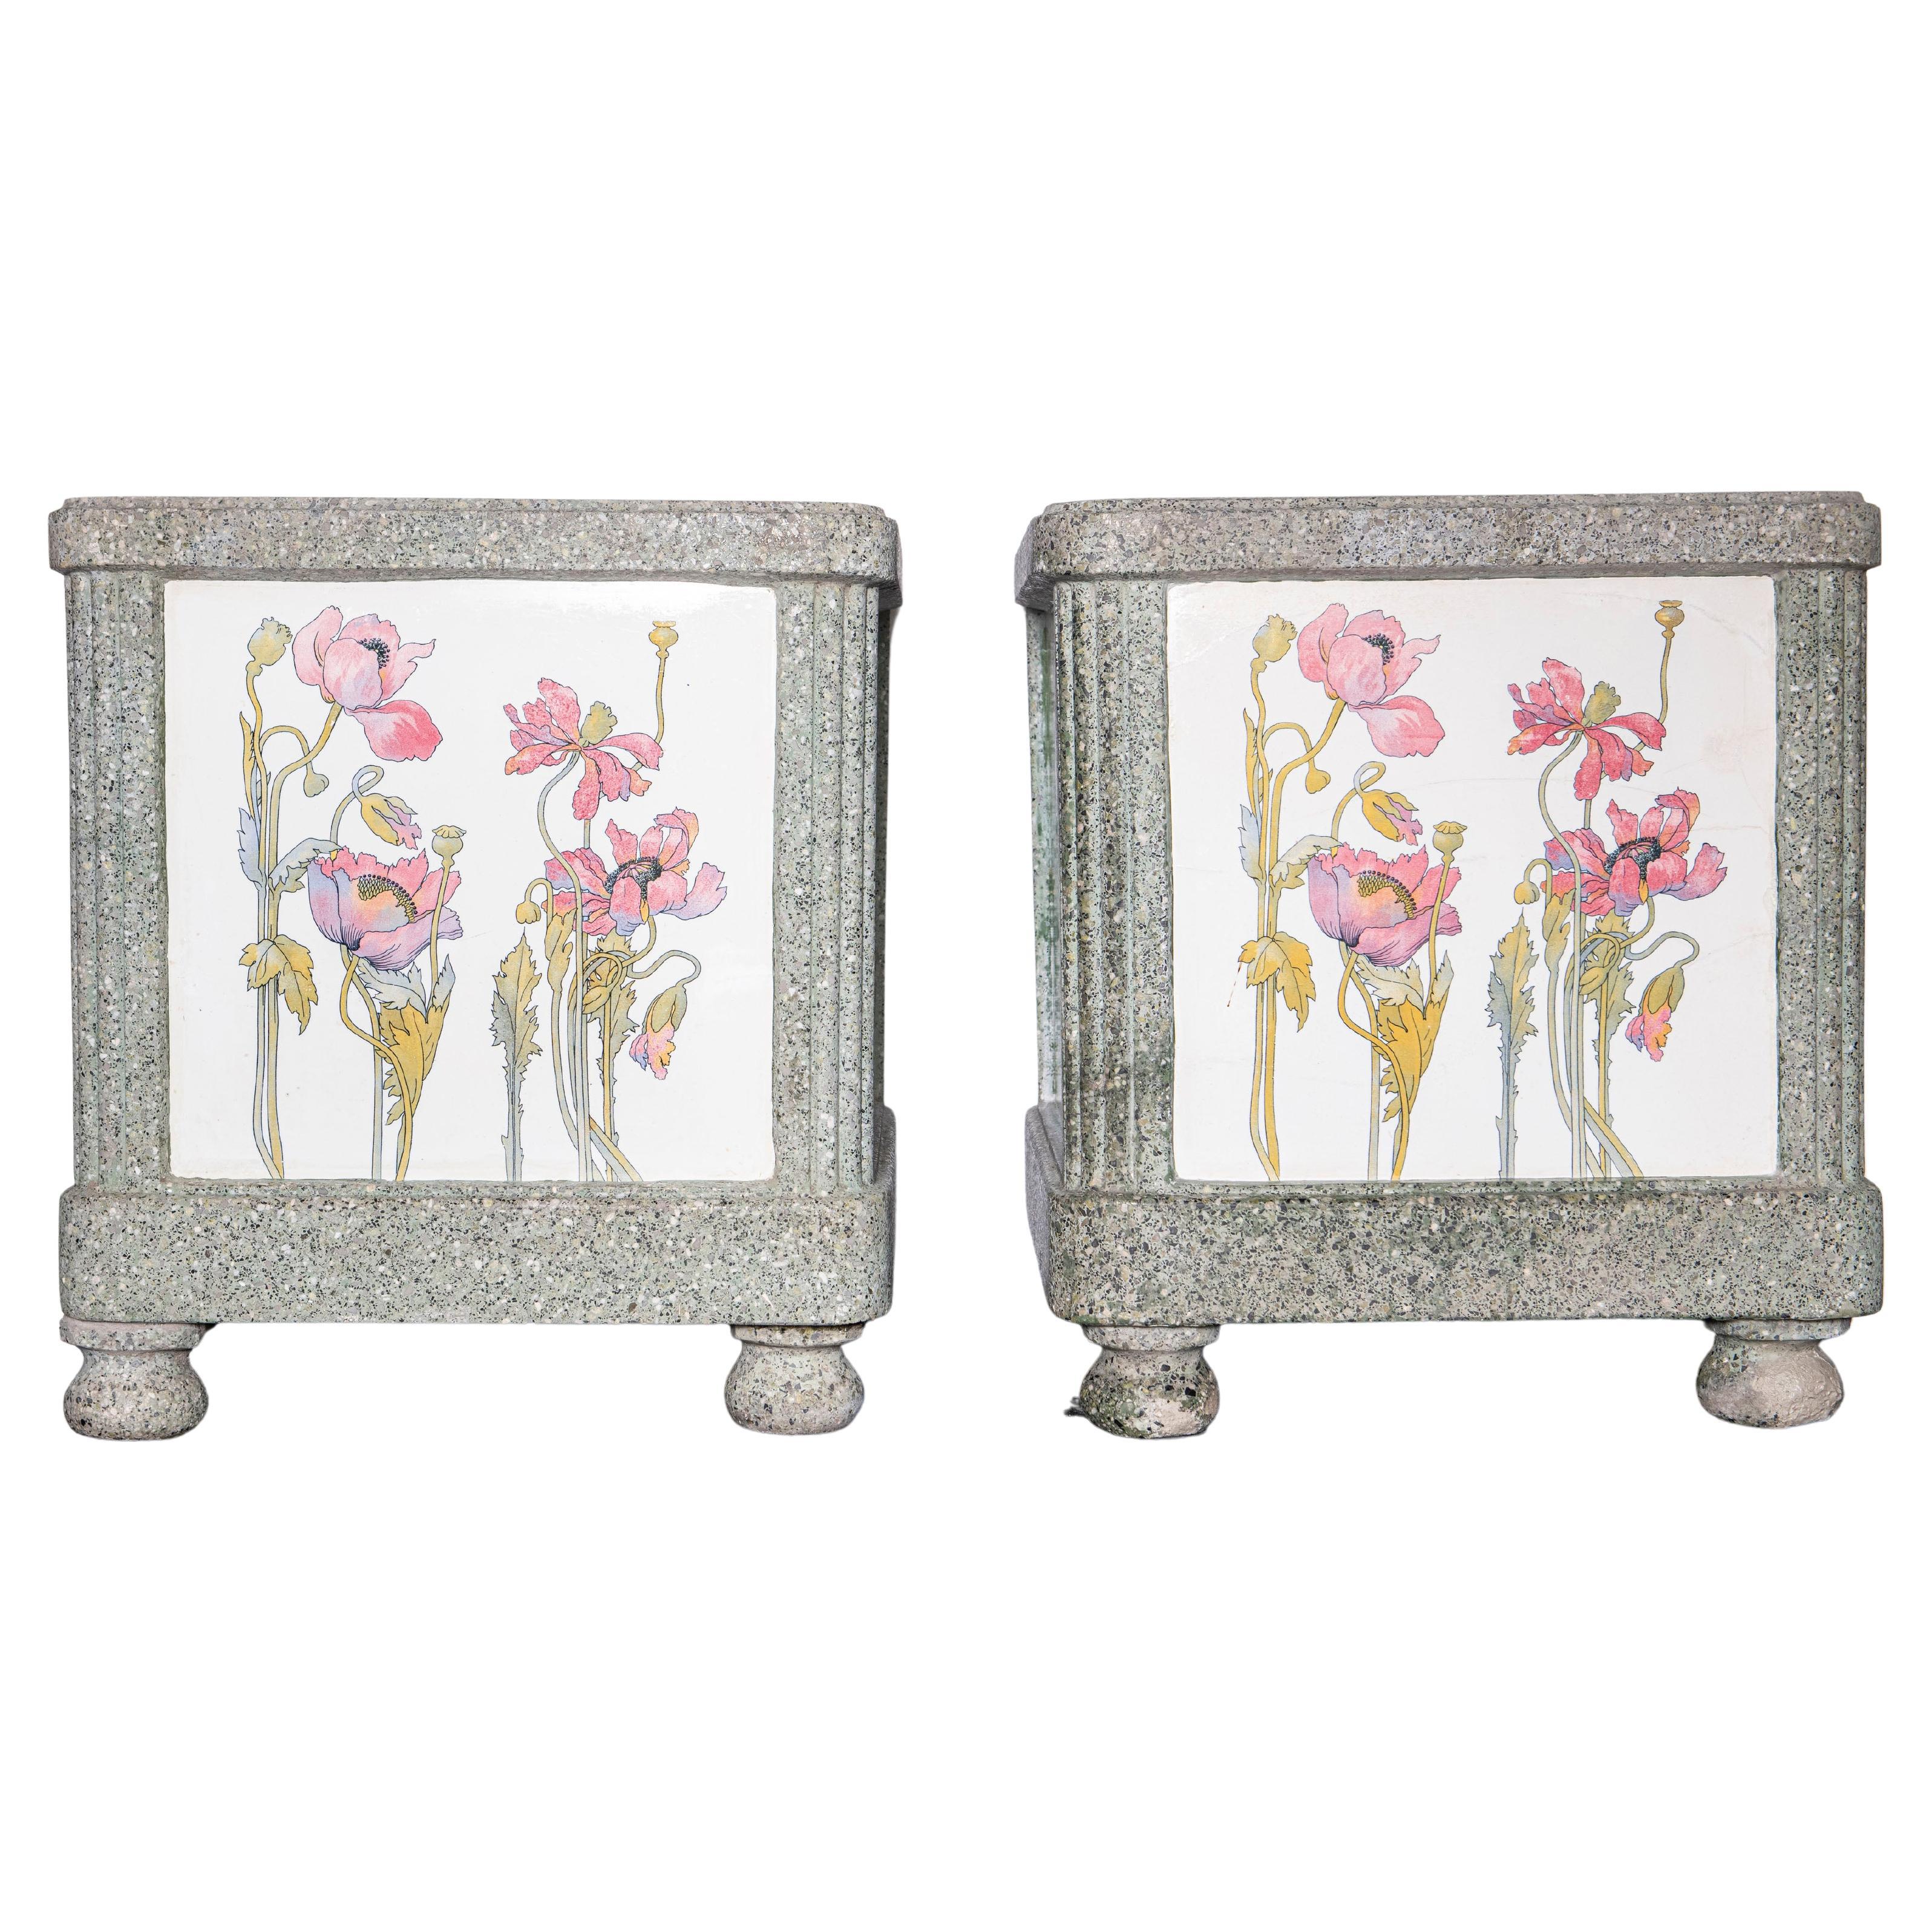 Pair of Stone and Enameled Ceramic Planters, France, Early 20th Century For Sale